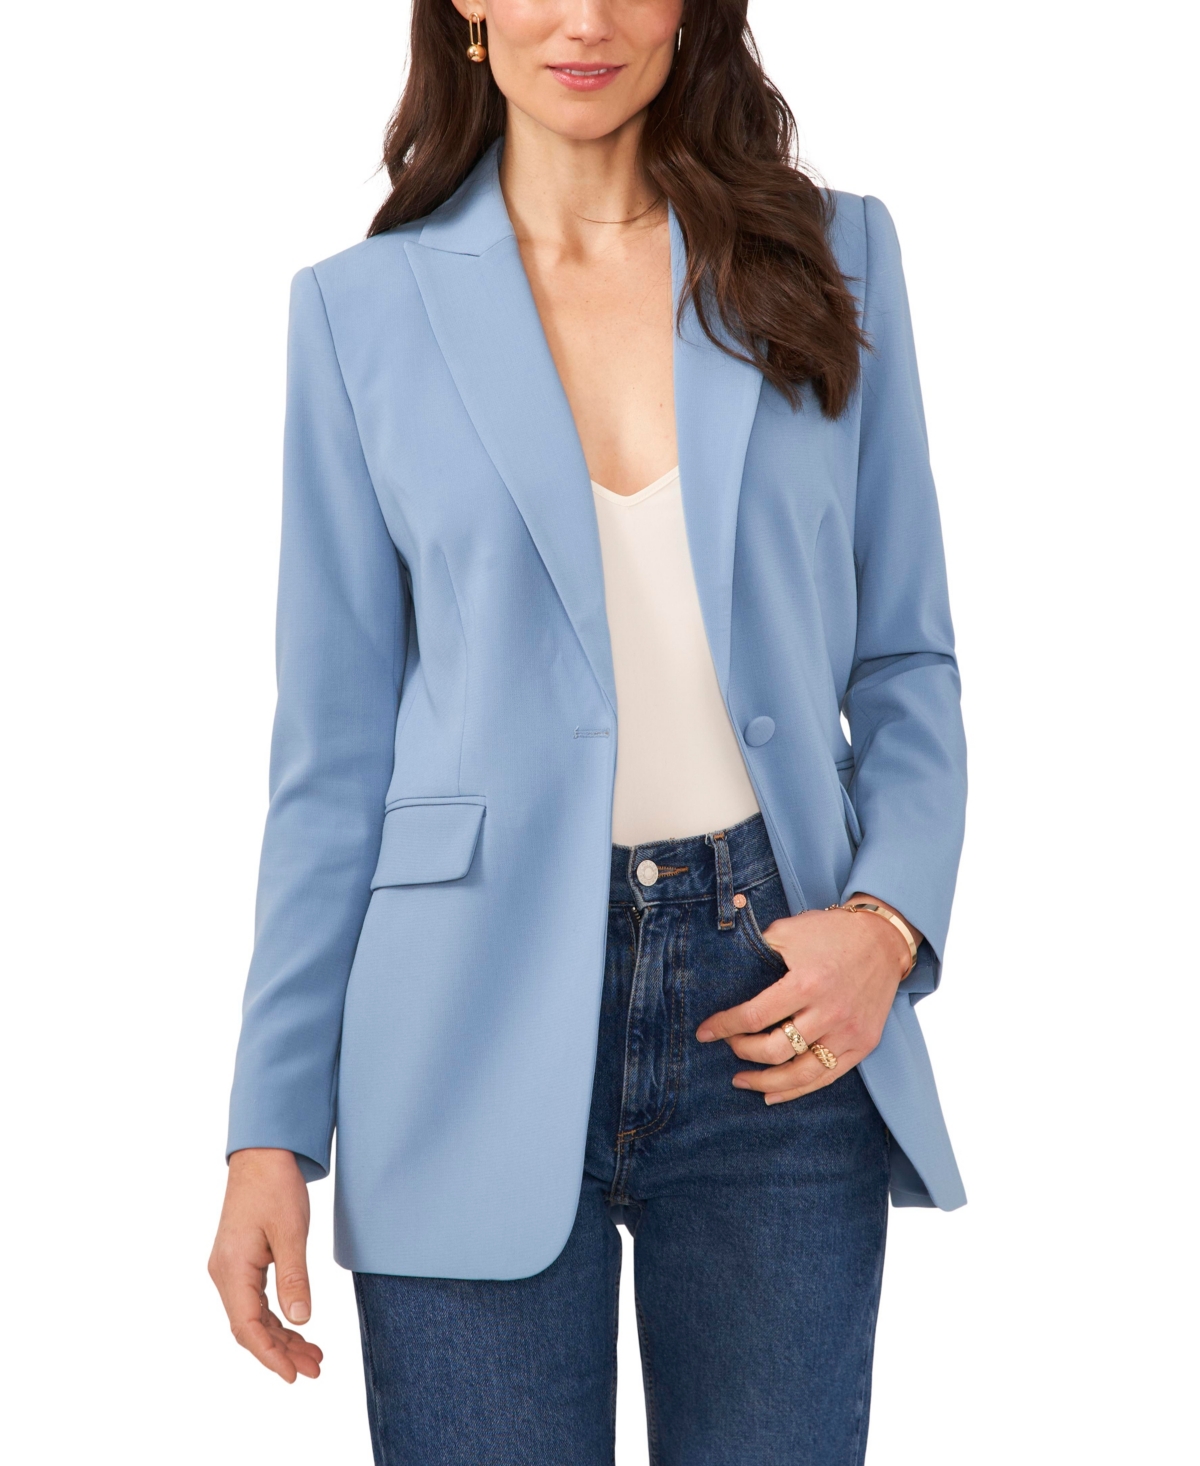 Vince Camuto Women's Single-Breasted Blazer